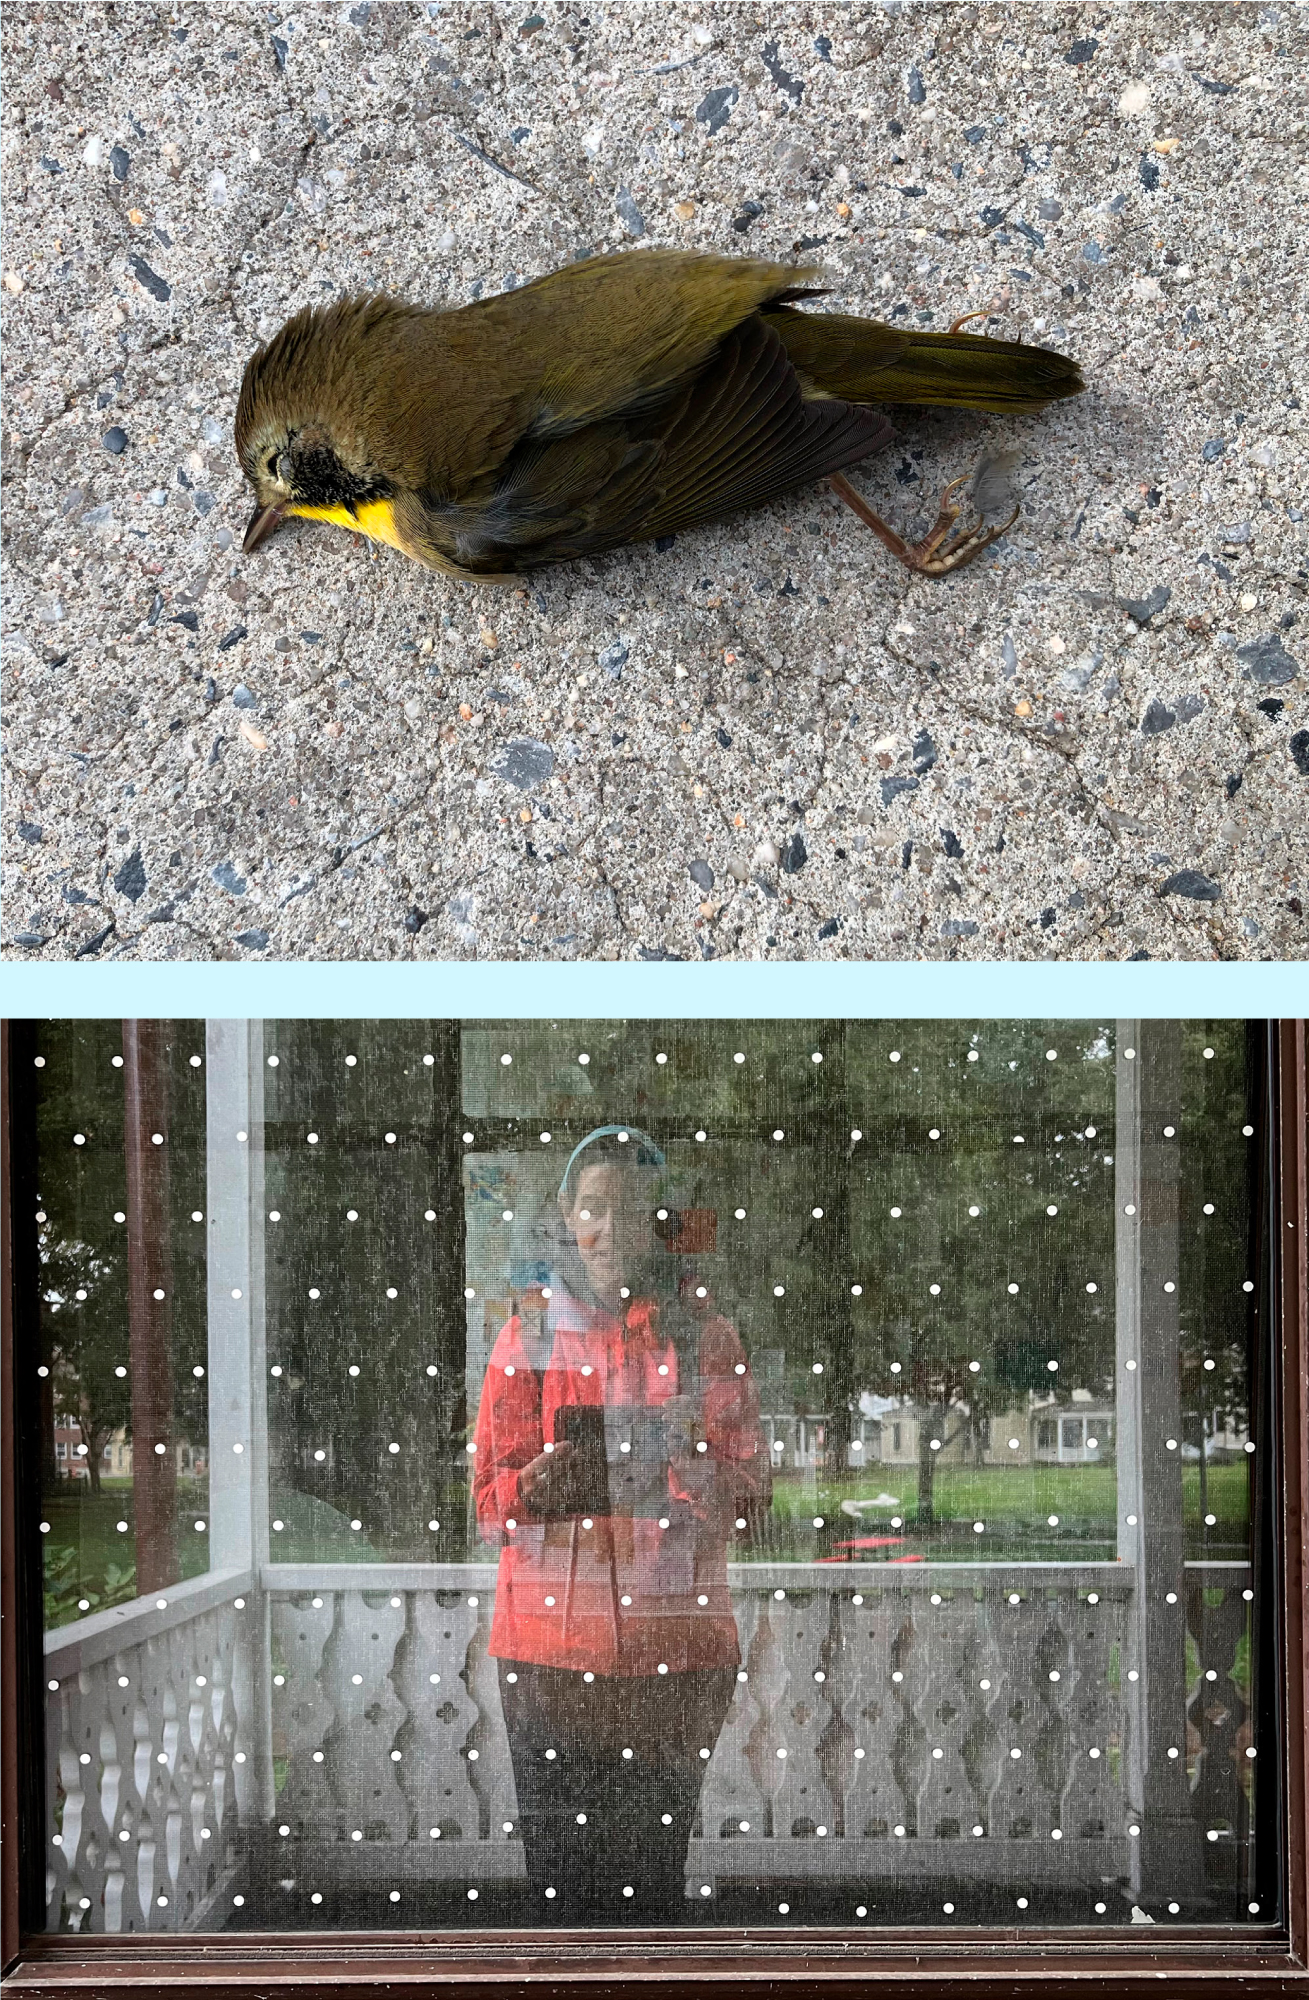 A photo of a dead bird on the ground after striking a window (top) and a photo of window decals in a window (bottom)